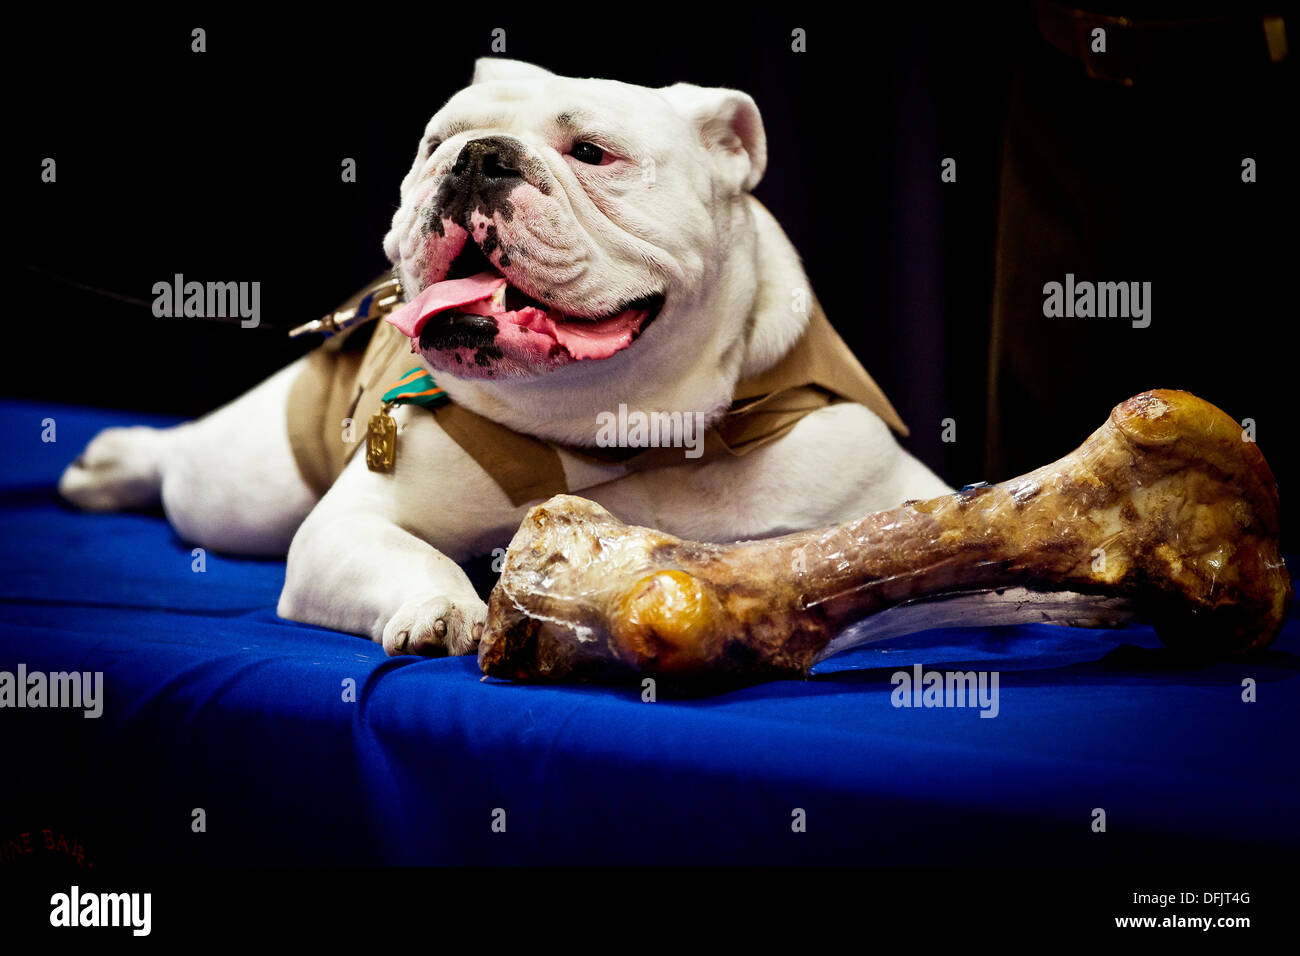 The outgoing Marine Corps mascot, Sgt. Chesty XIII, lays next to a recently received bone treat during his retirement ceremony at Crawford Hall at the Marine Barracks Washington August 28, 2013 in Washington, D.C. Chesty XIII served as the Marine Corps mascot for five years. Stock Photo